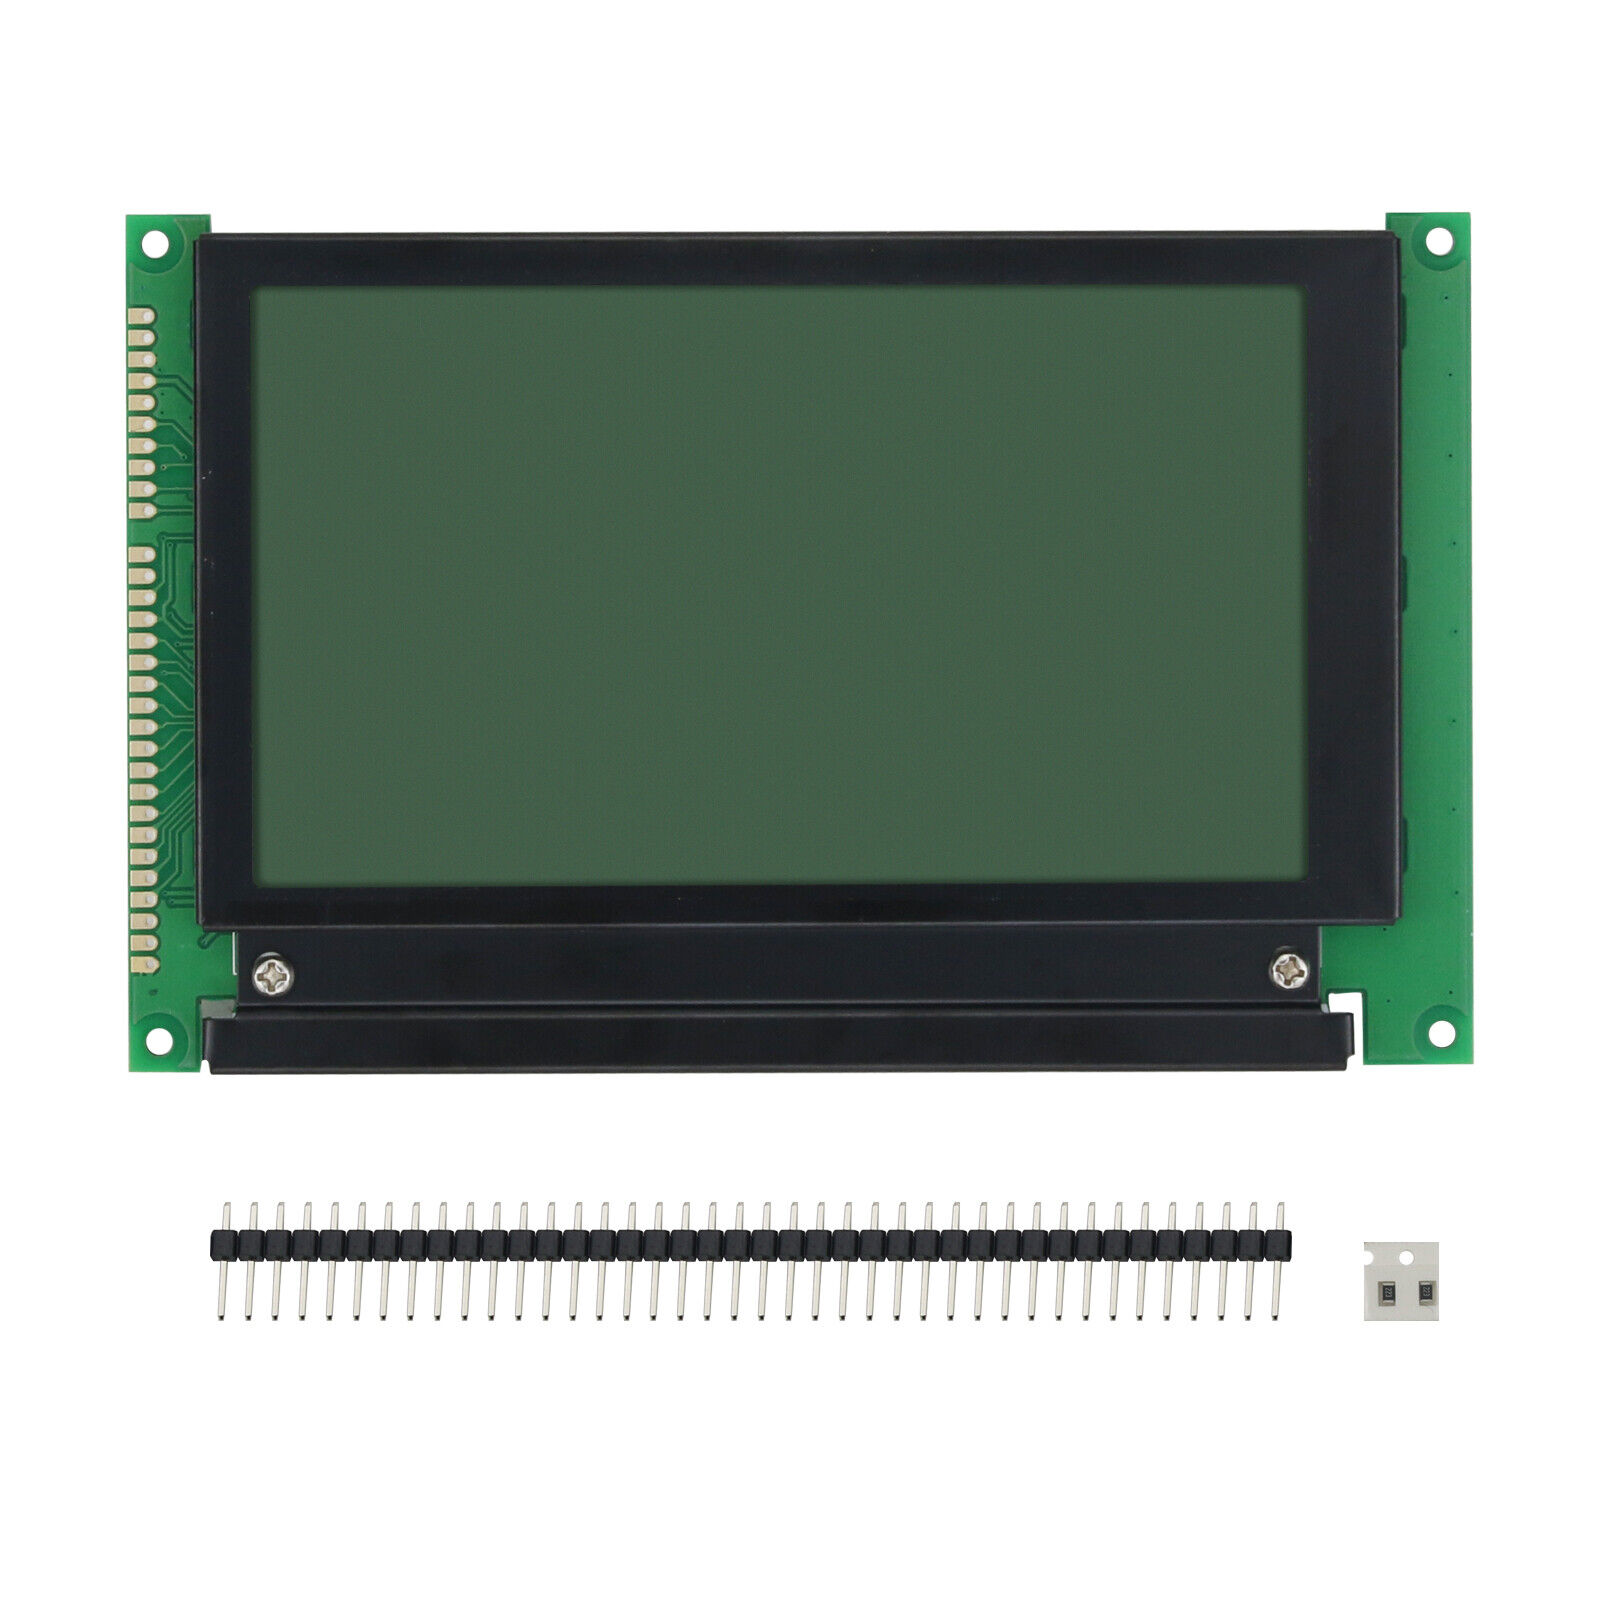 LMG7420PLFC-X Industrial Control LCD Display Panel Made In Taiwan For Hitachi